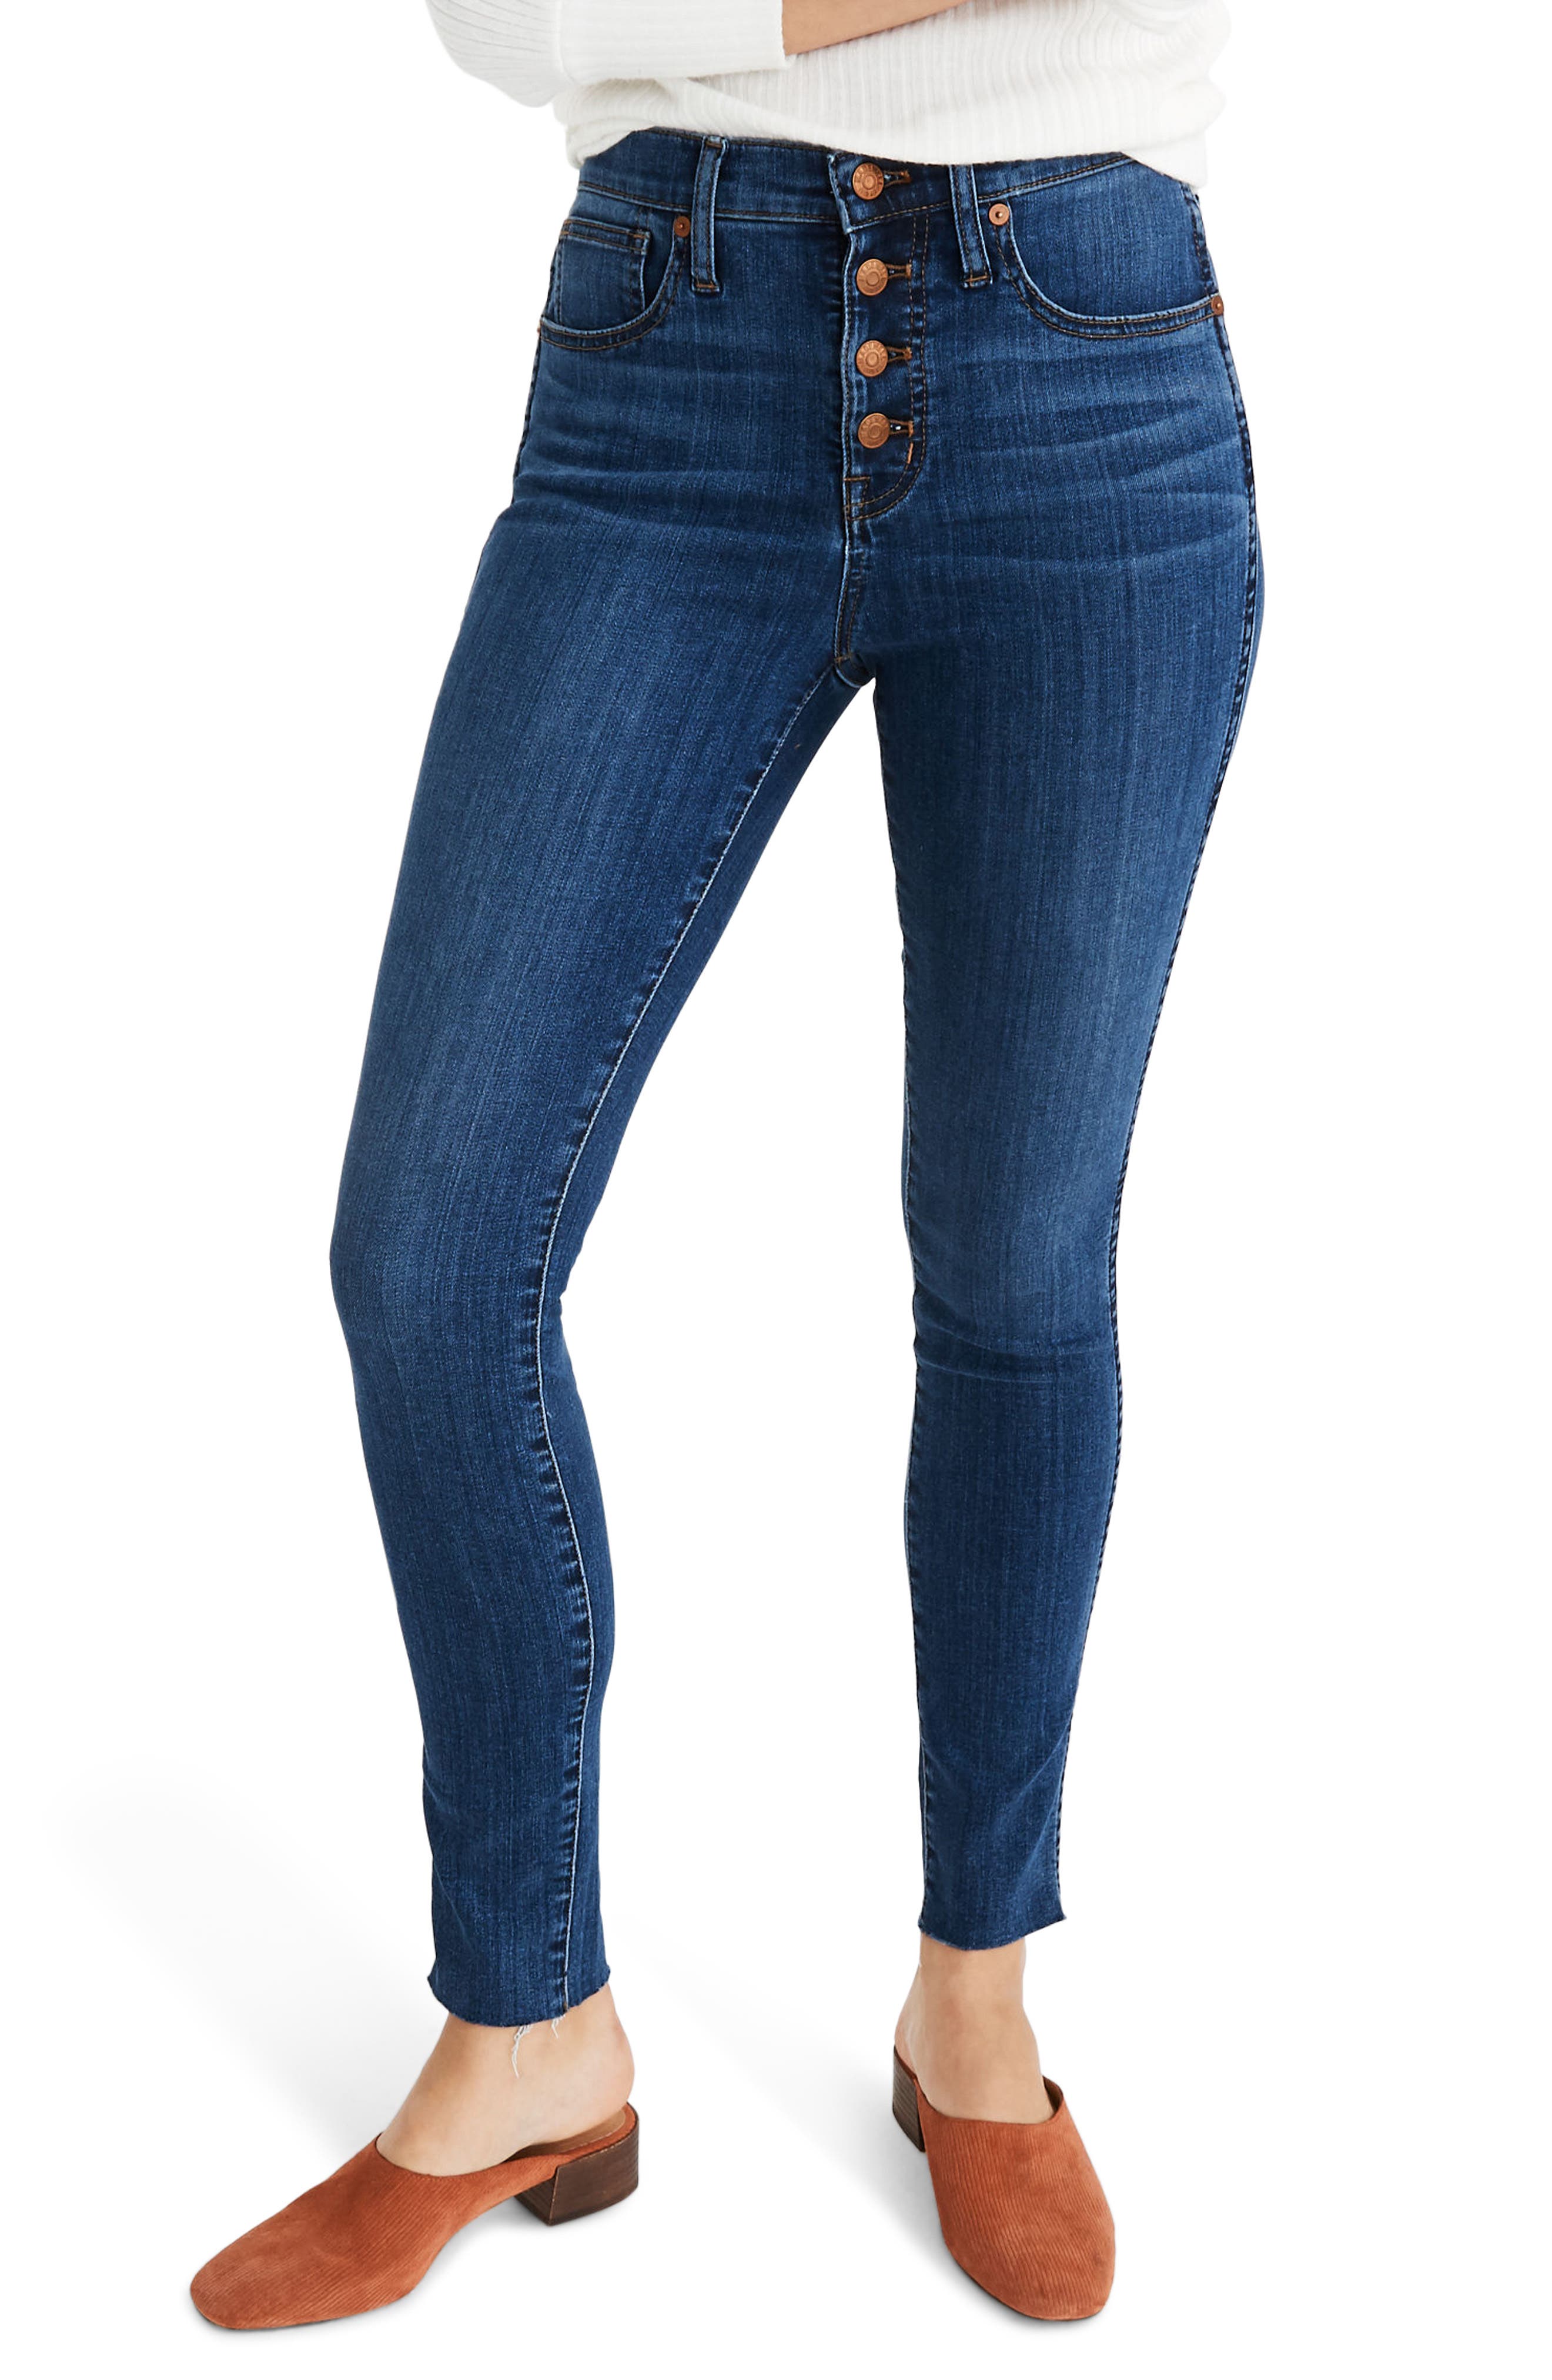 madewell button jeans